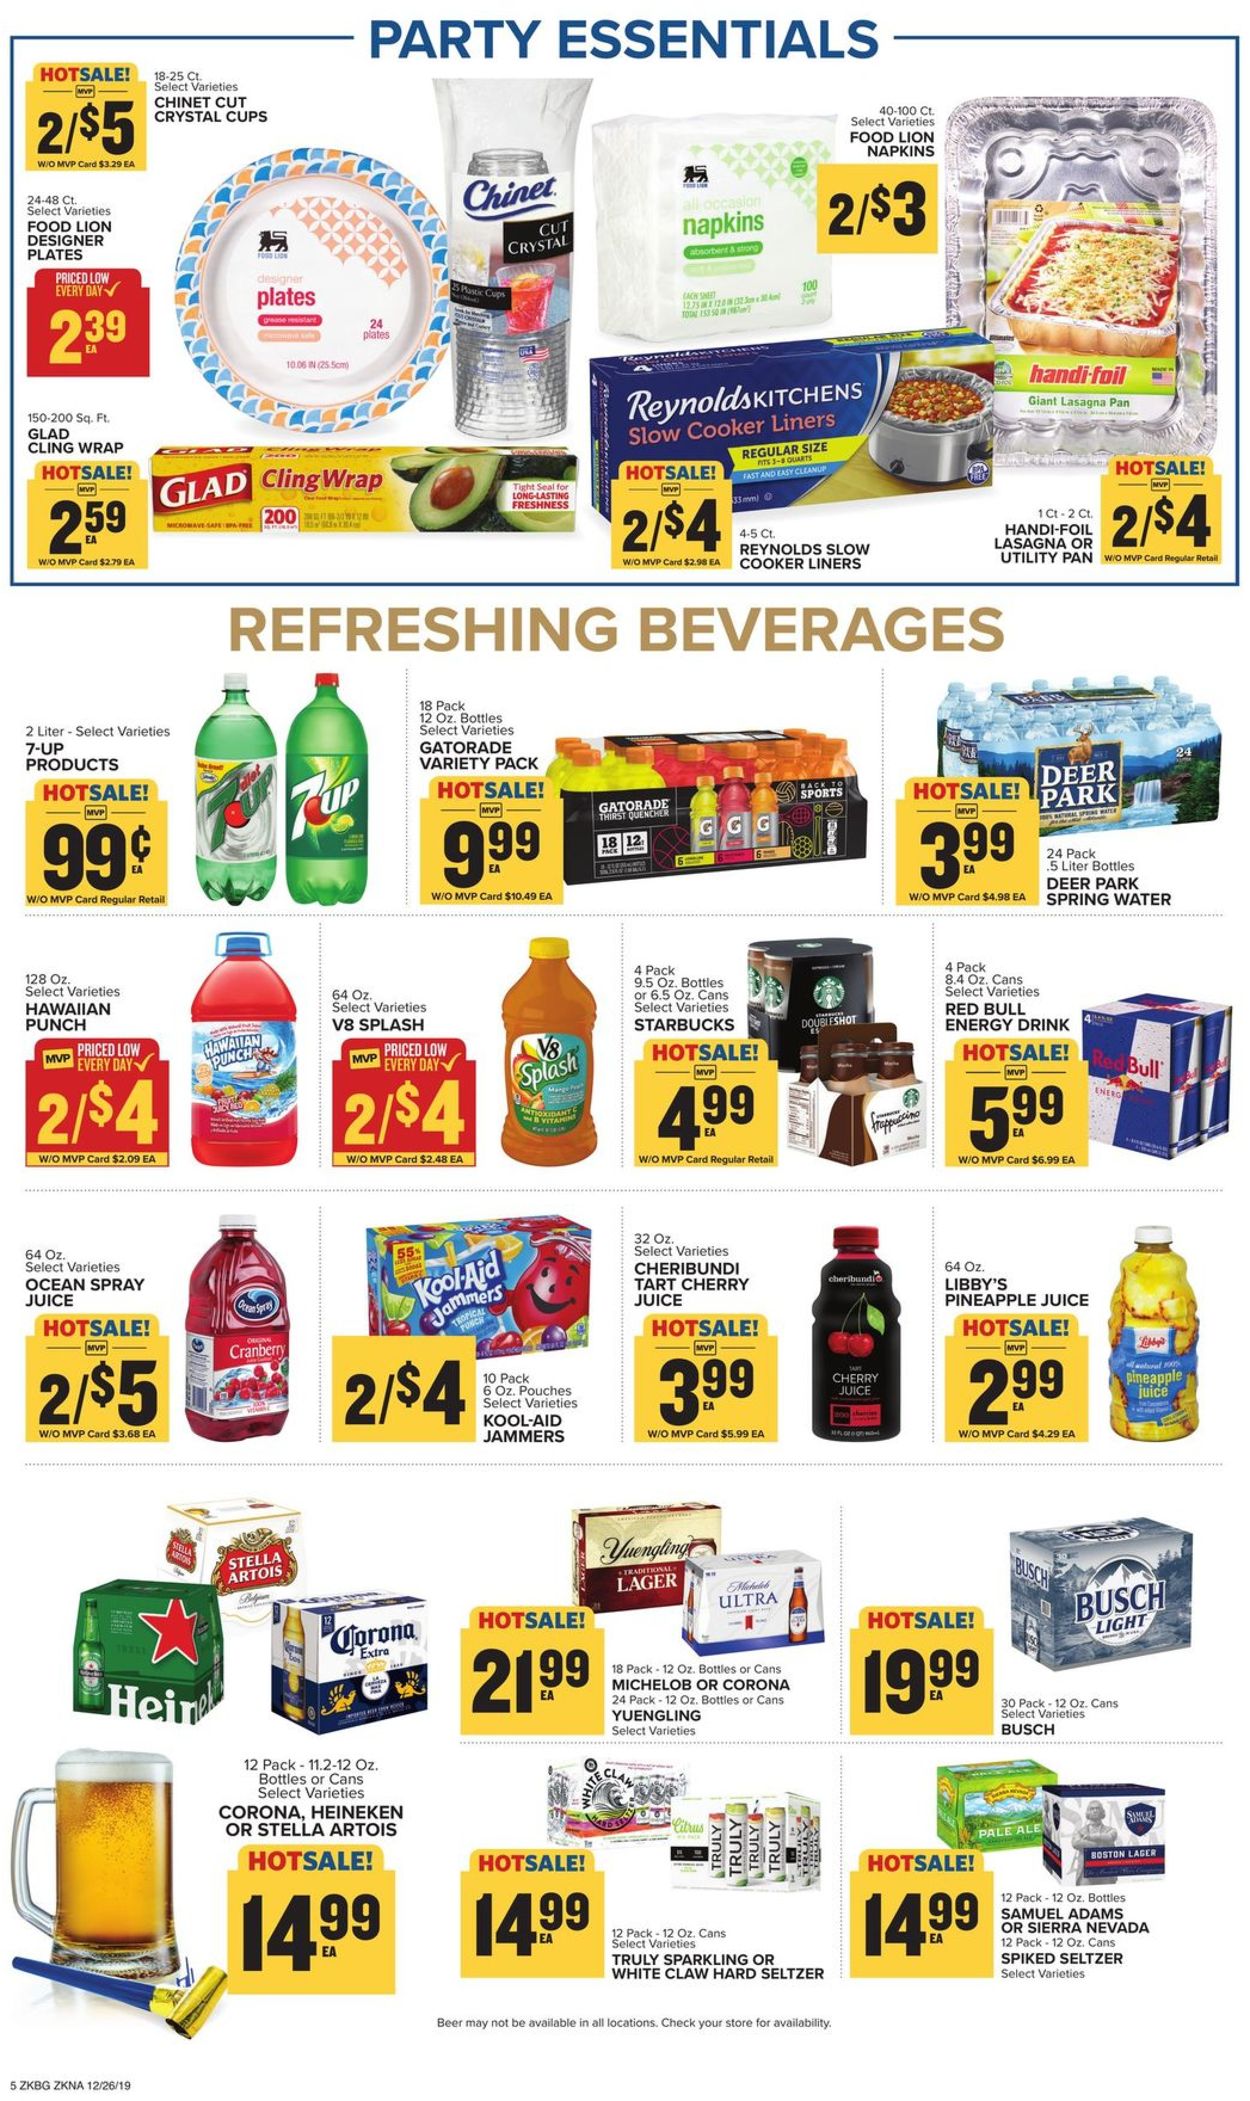 Catalogue Food Lion - New Year's Ad 2019/2020 from 12/26/2019